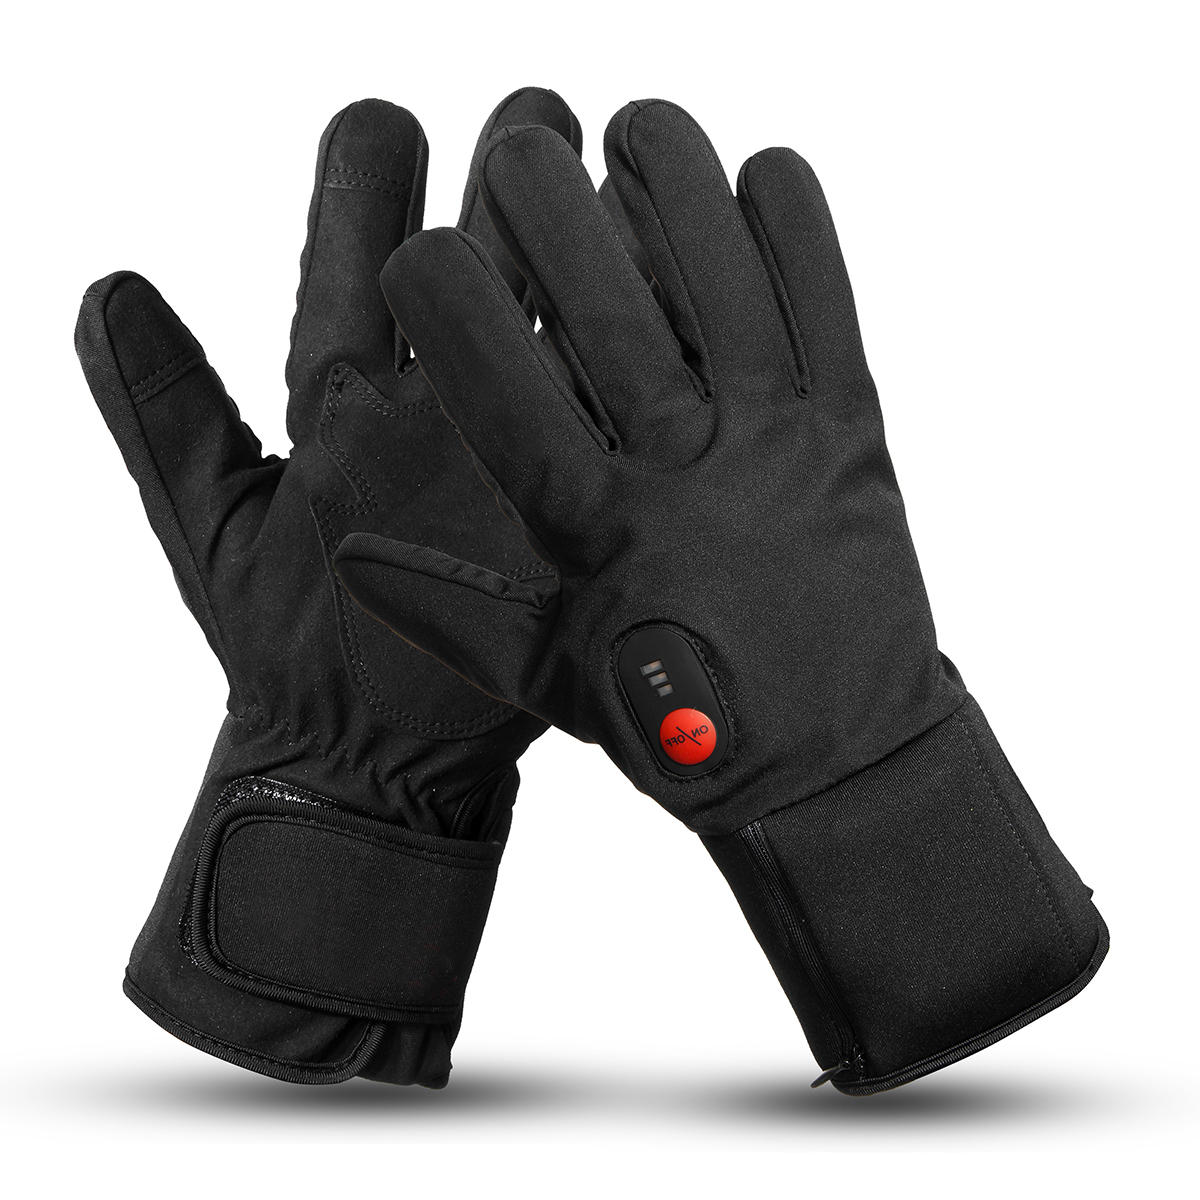 

7.4V 2200mah Electric Heated Gloves Motorcycle Winter Warmer Outdoor Skiing 3-Speed Temperature Adjustment